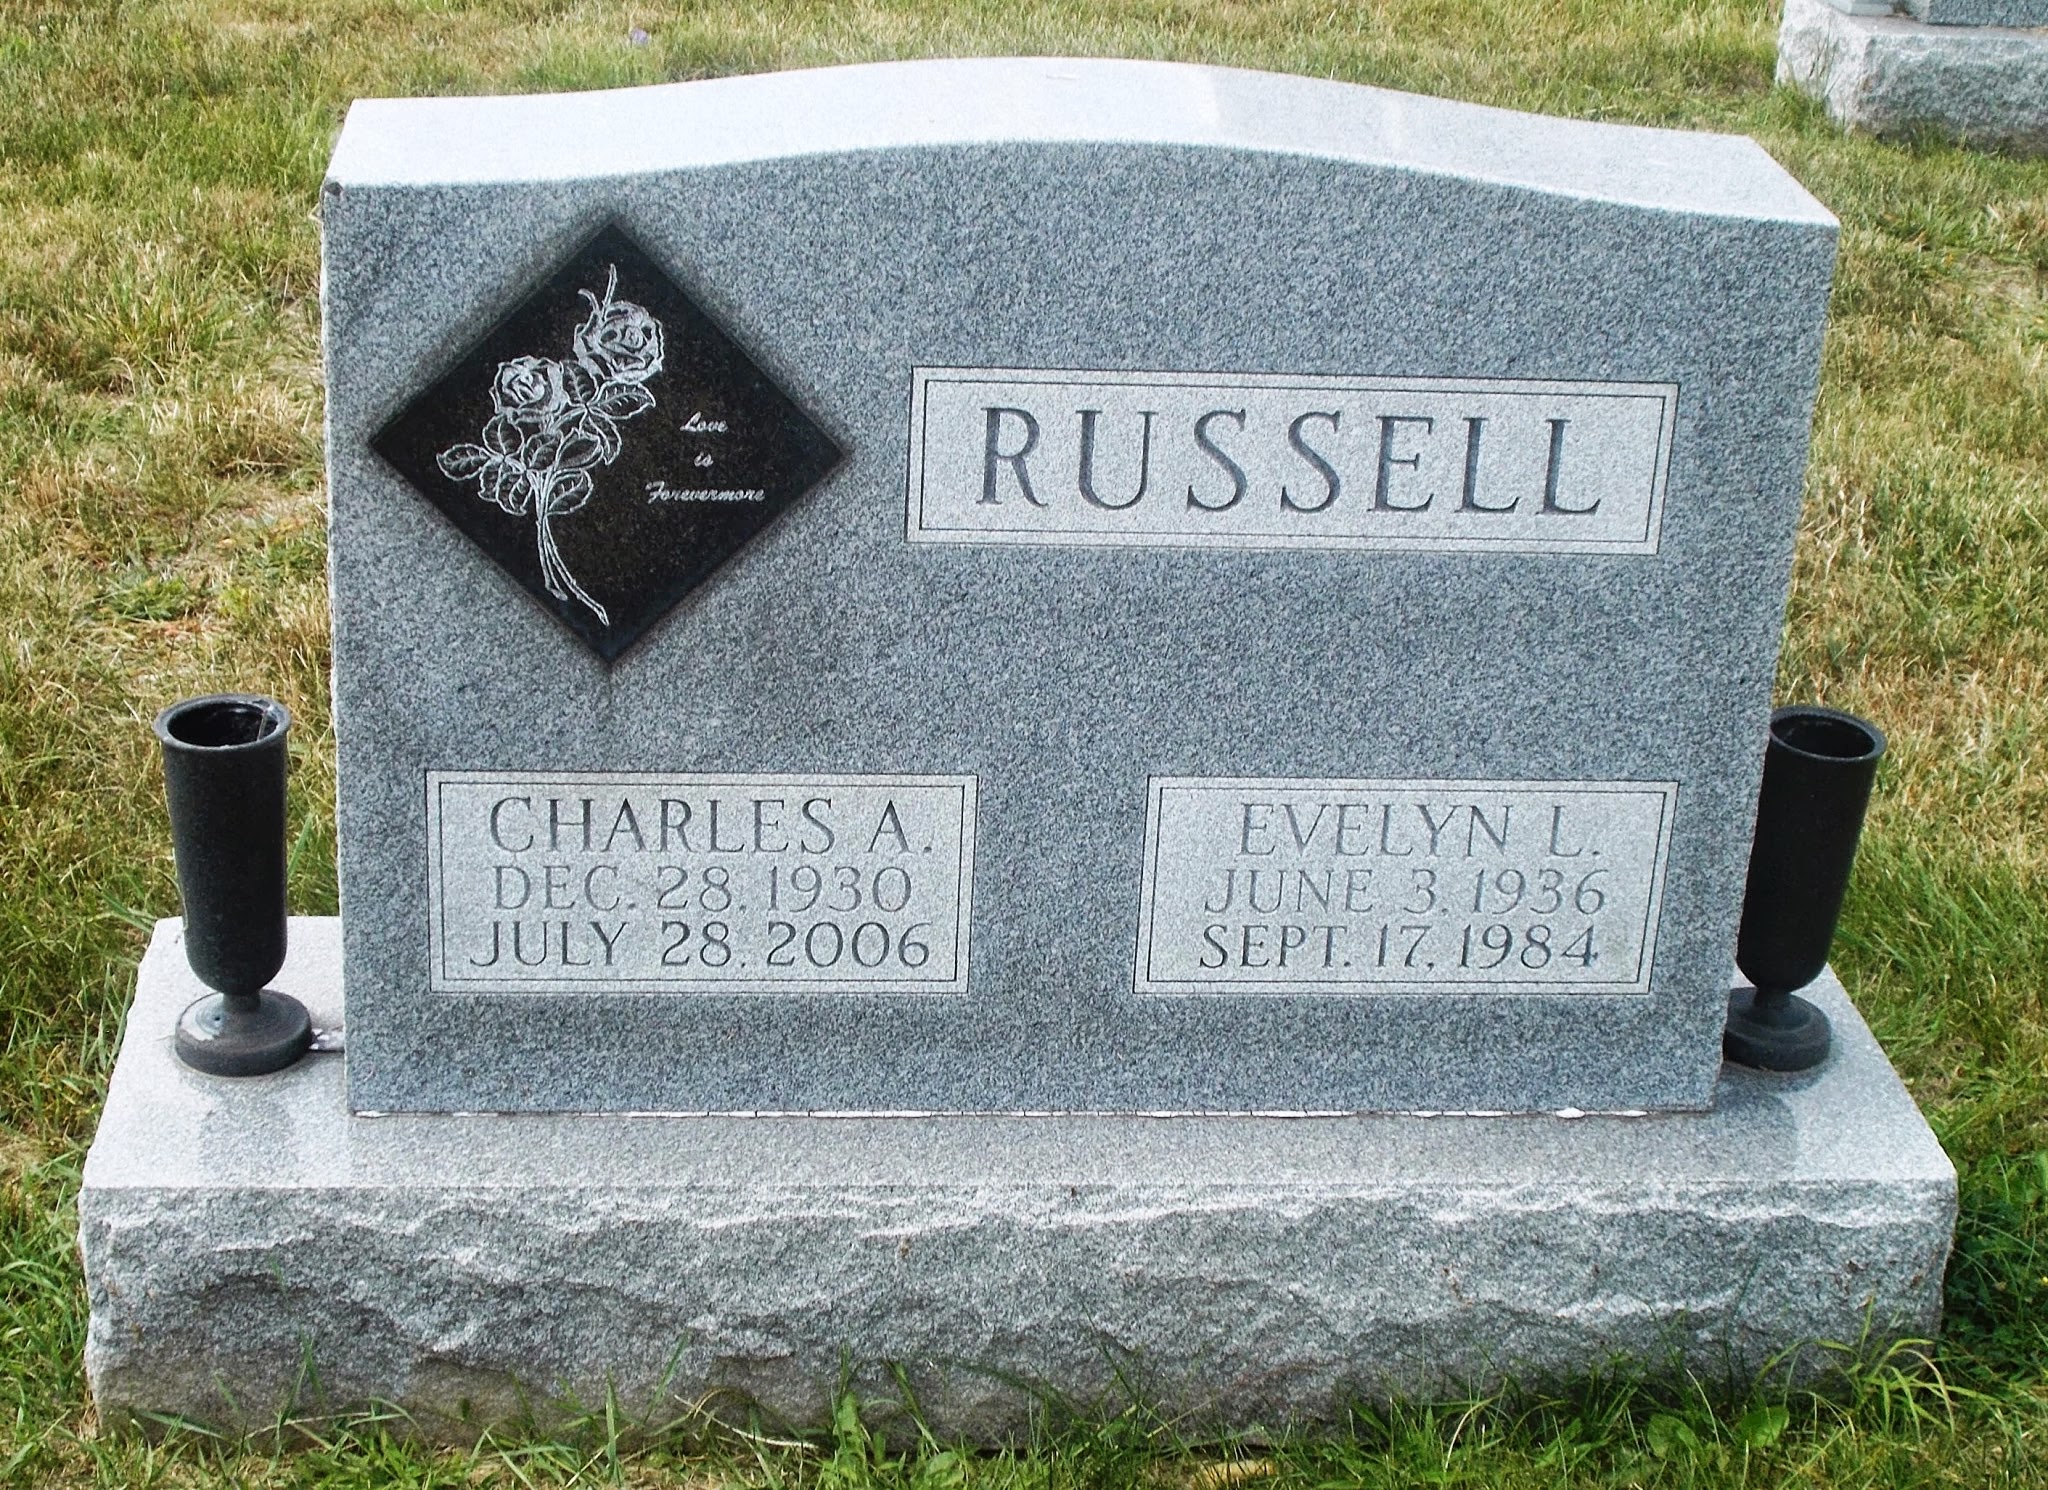 Charles A Russell